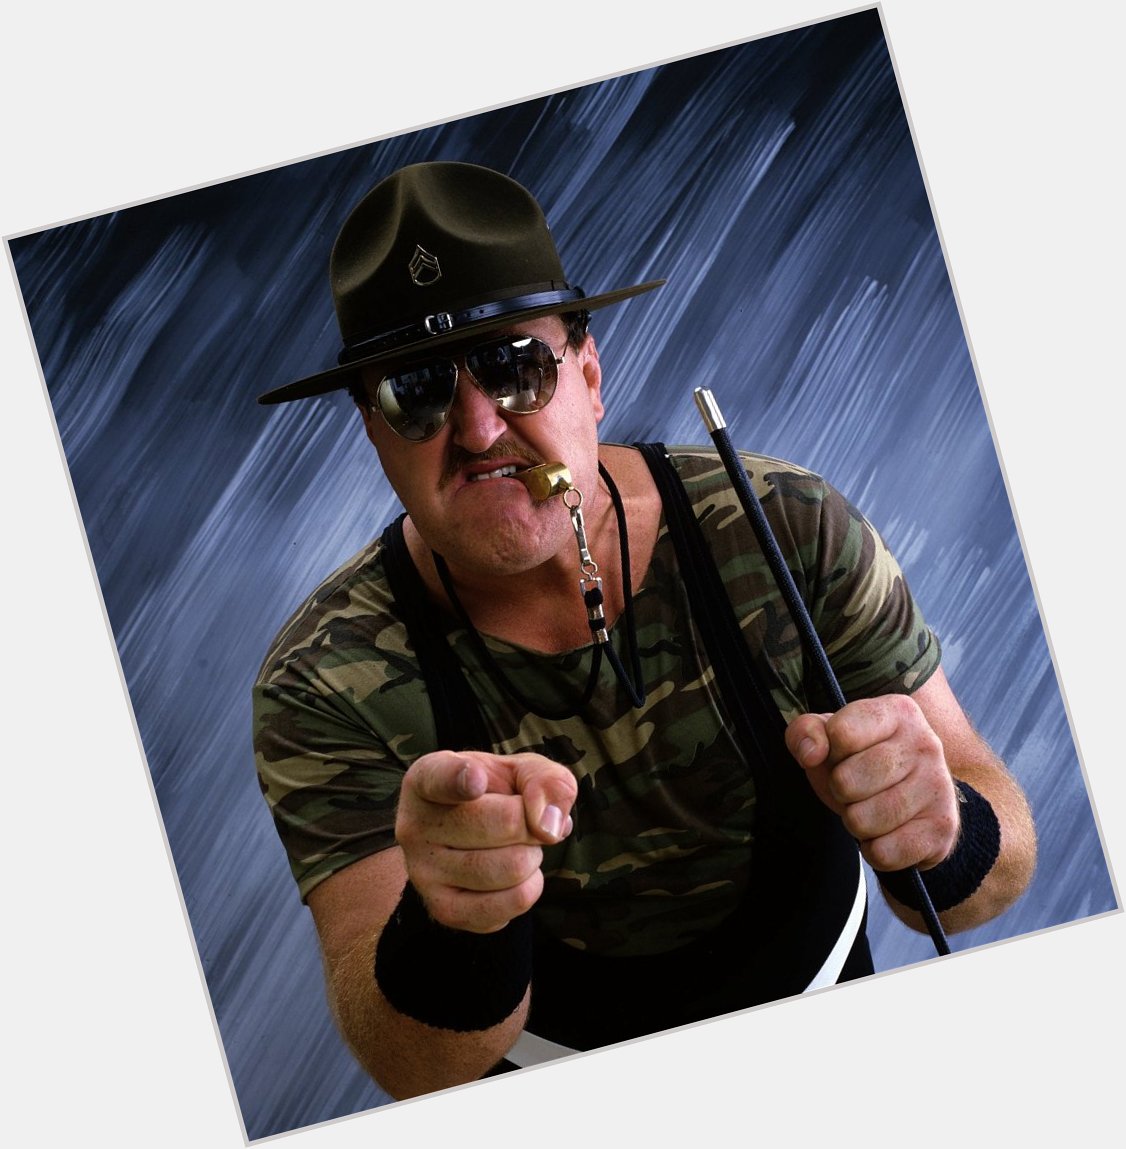 Https://fanpagepress.net/m/S/Sgt  Slaughter Dating 2